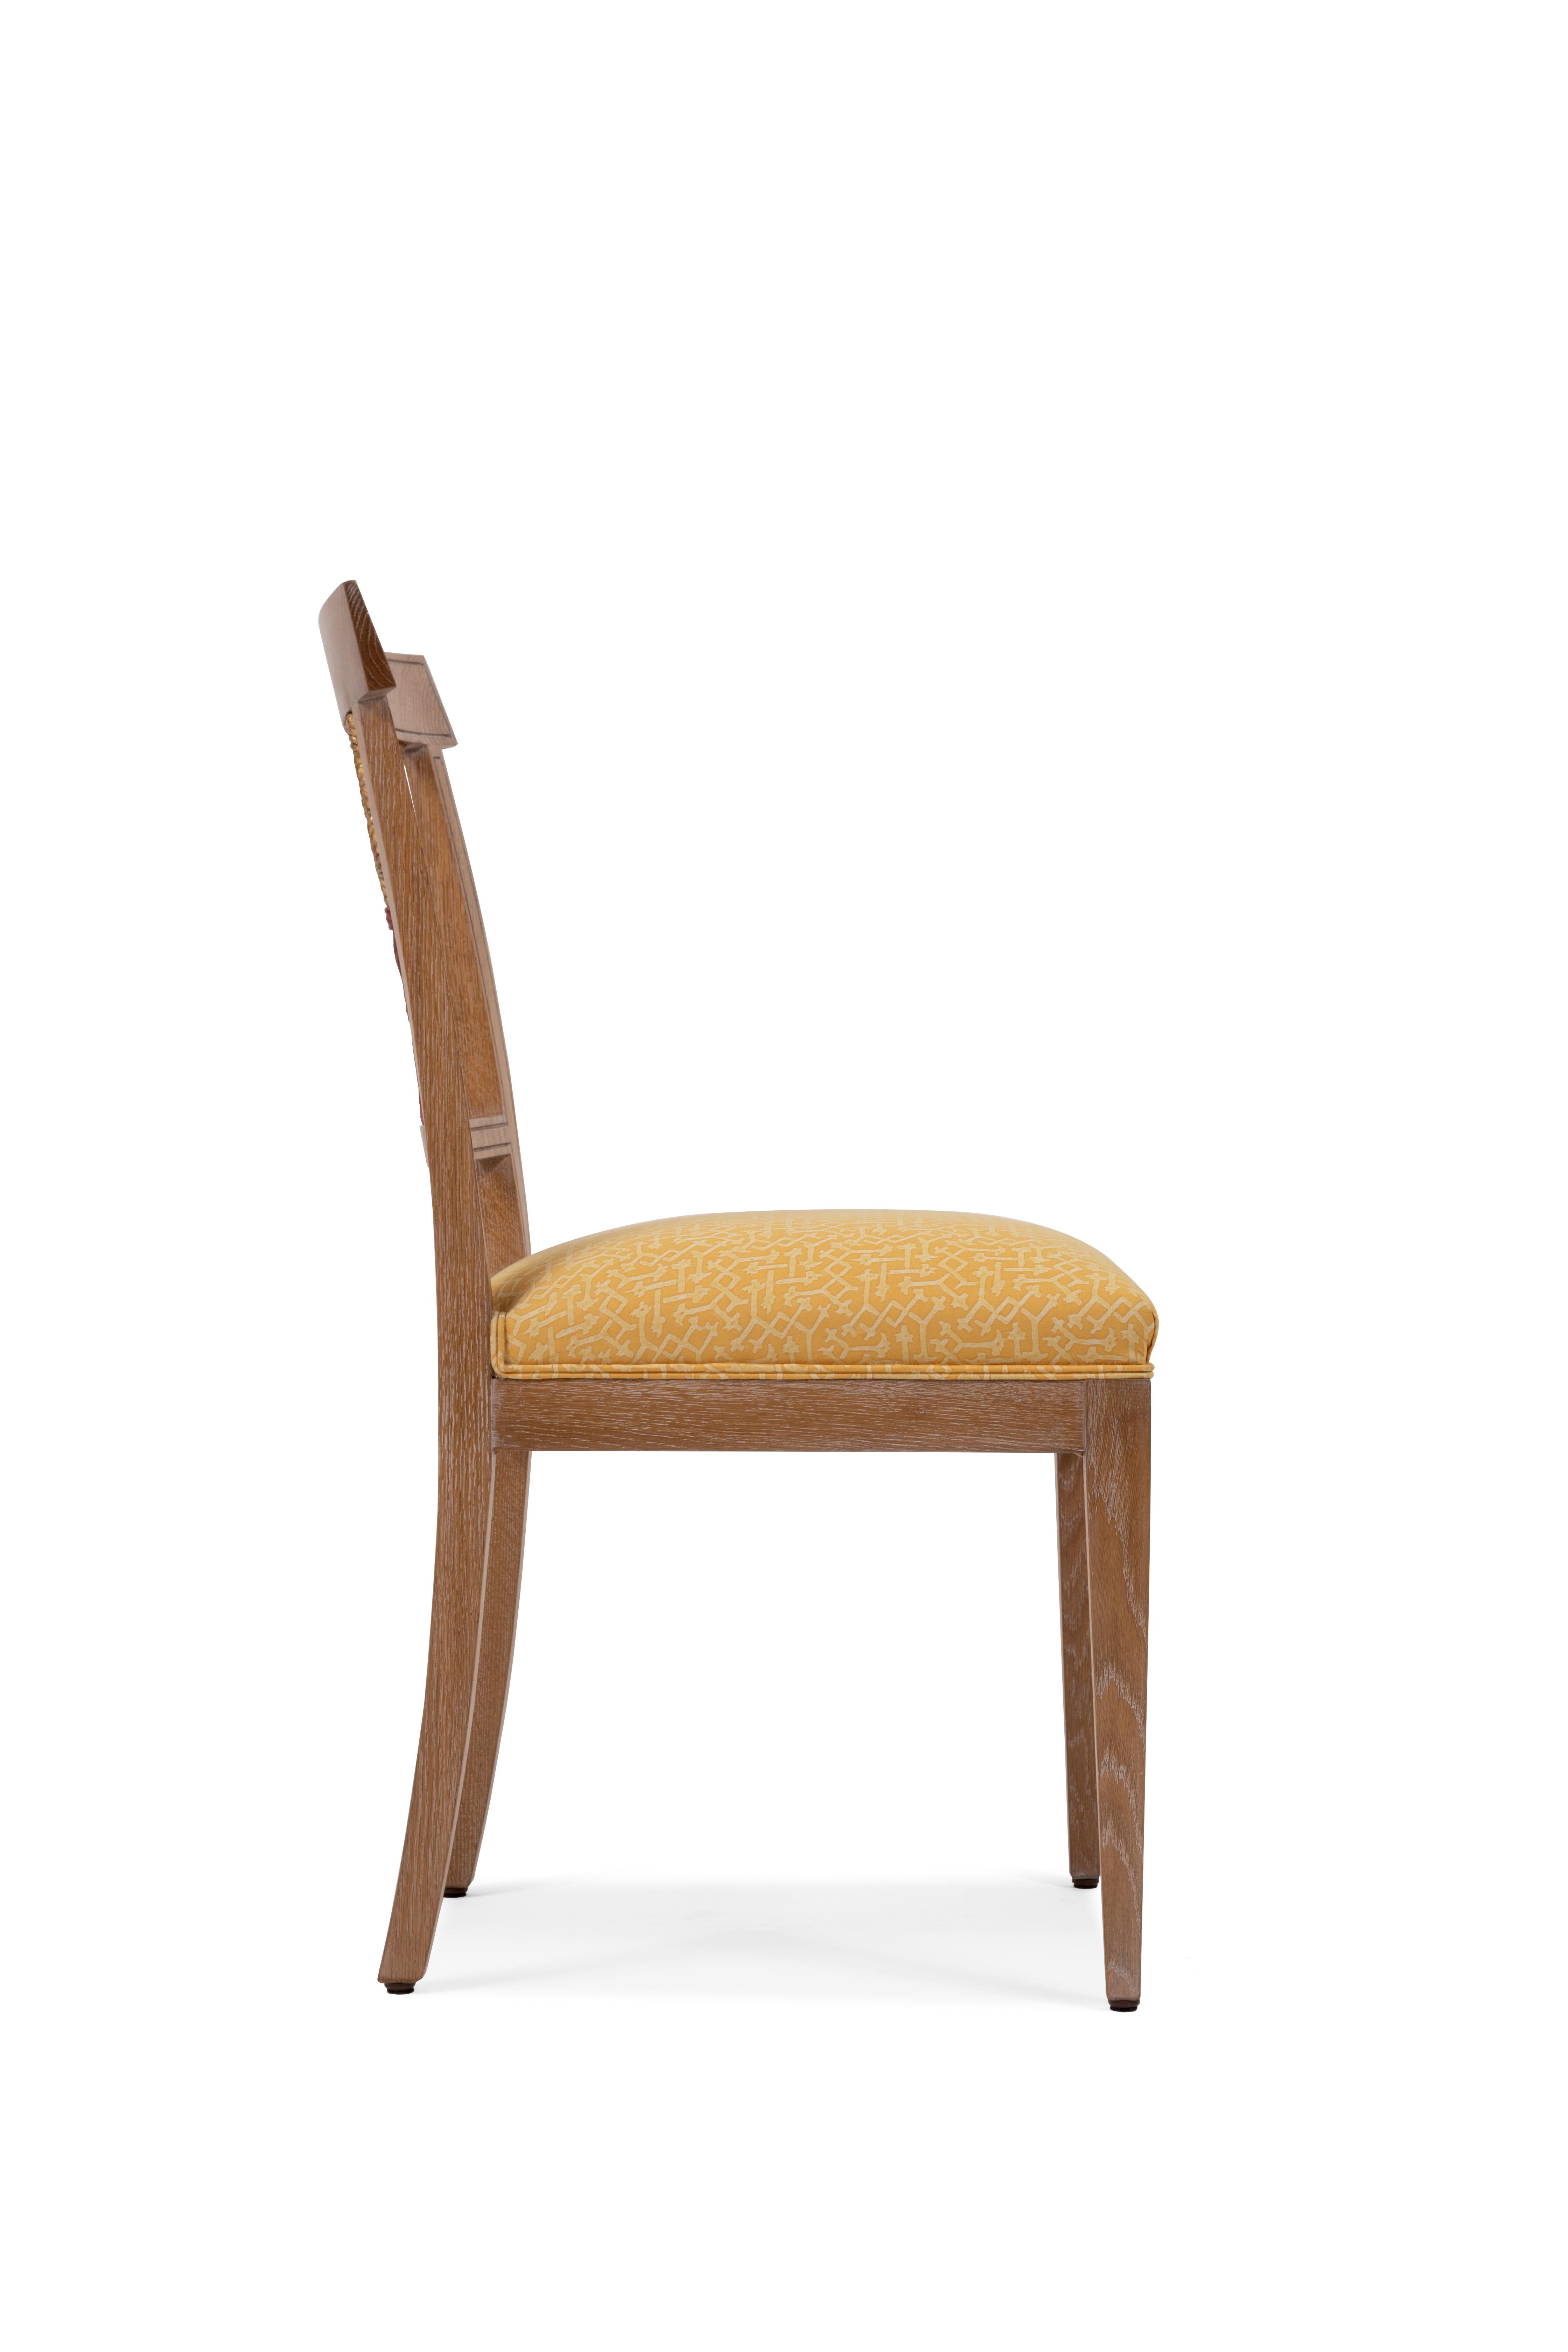 Italian Oak Dining Chair with Decorative Ears of Wheat Hand Carved, Made in Italy For Sale